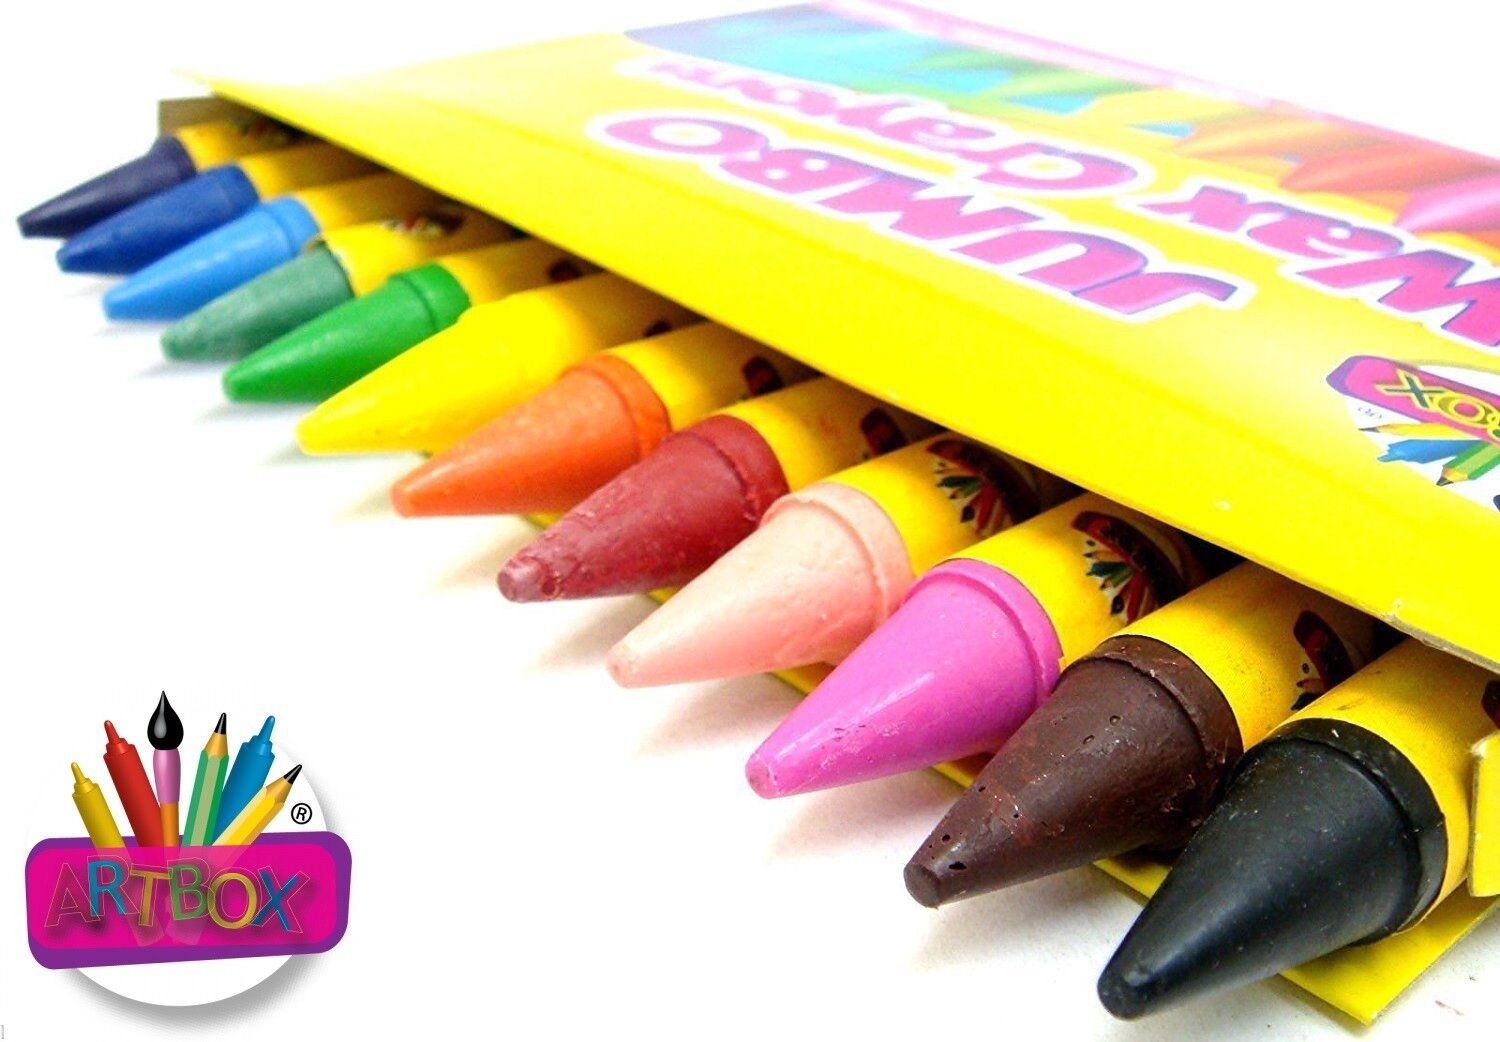 Jumbo Crayons All-In-One Crayon 8 Colors,Kids Art Supplies Suitable for Toddlers Kids Children Adults Painting Crayon Crafts Art Painting Coloring